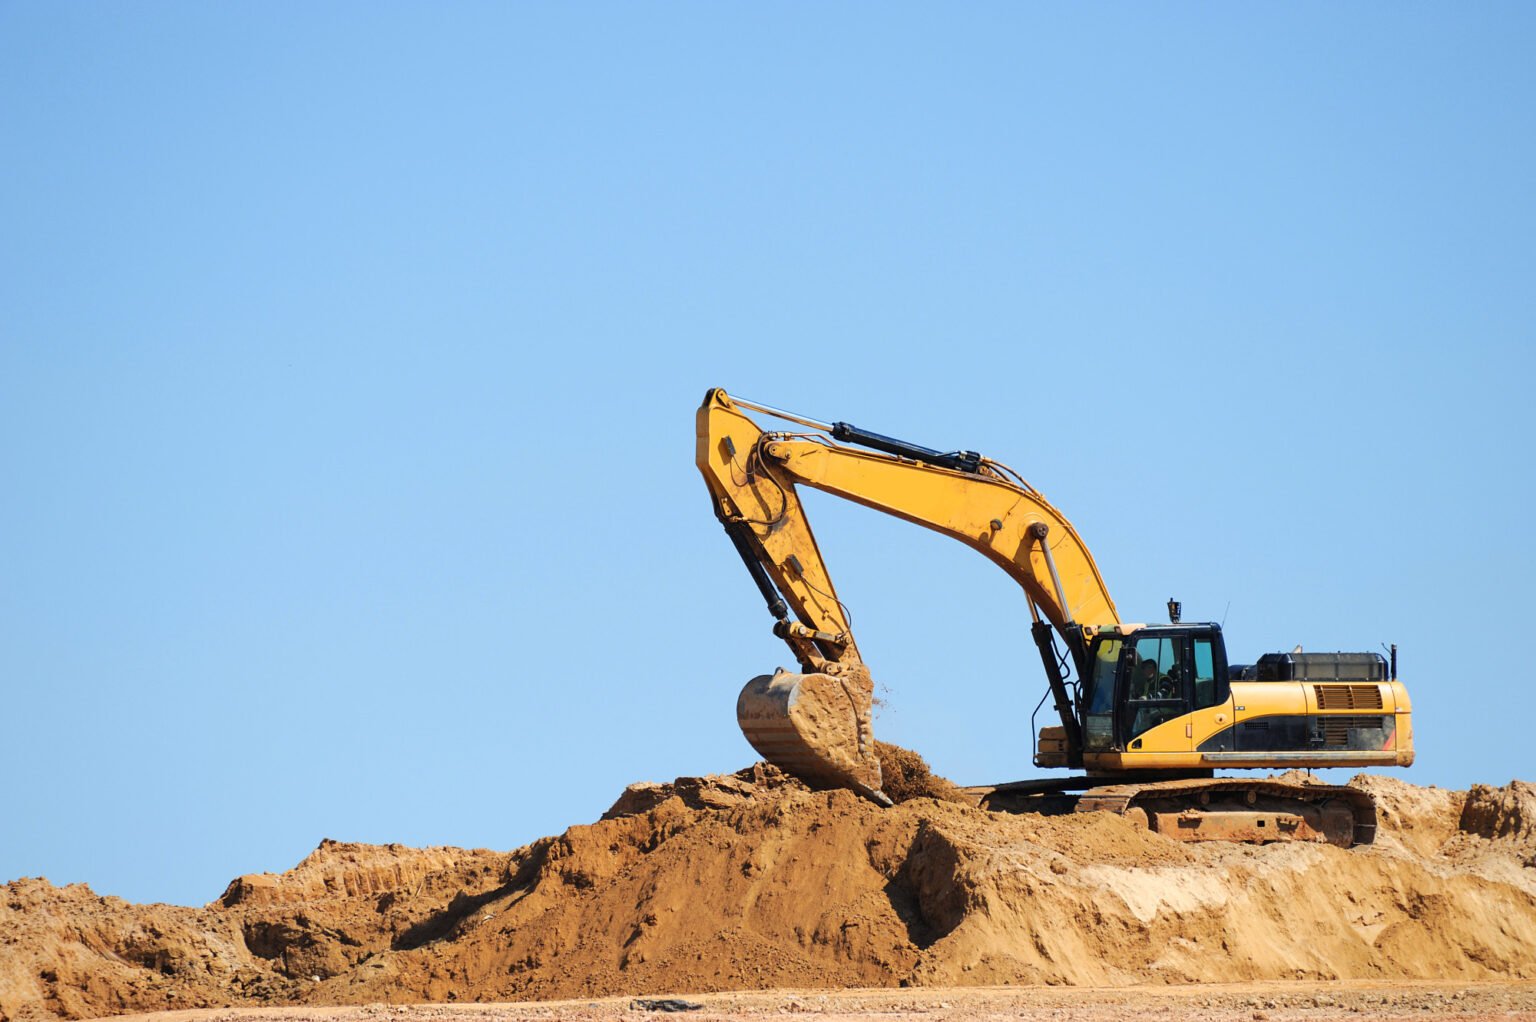 Options for Disposing Construction Equipment and Heavy-Duty Vehicles